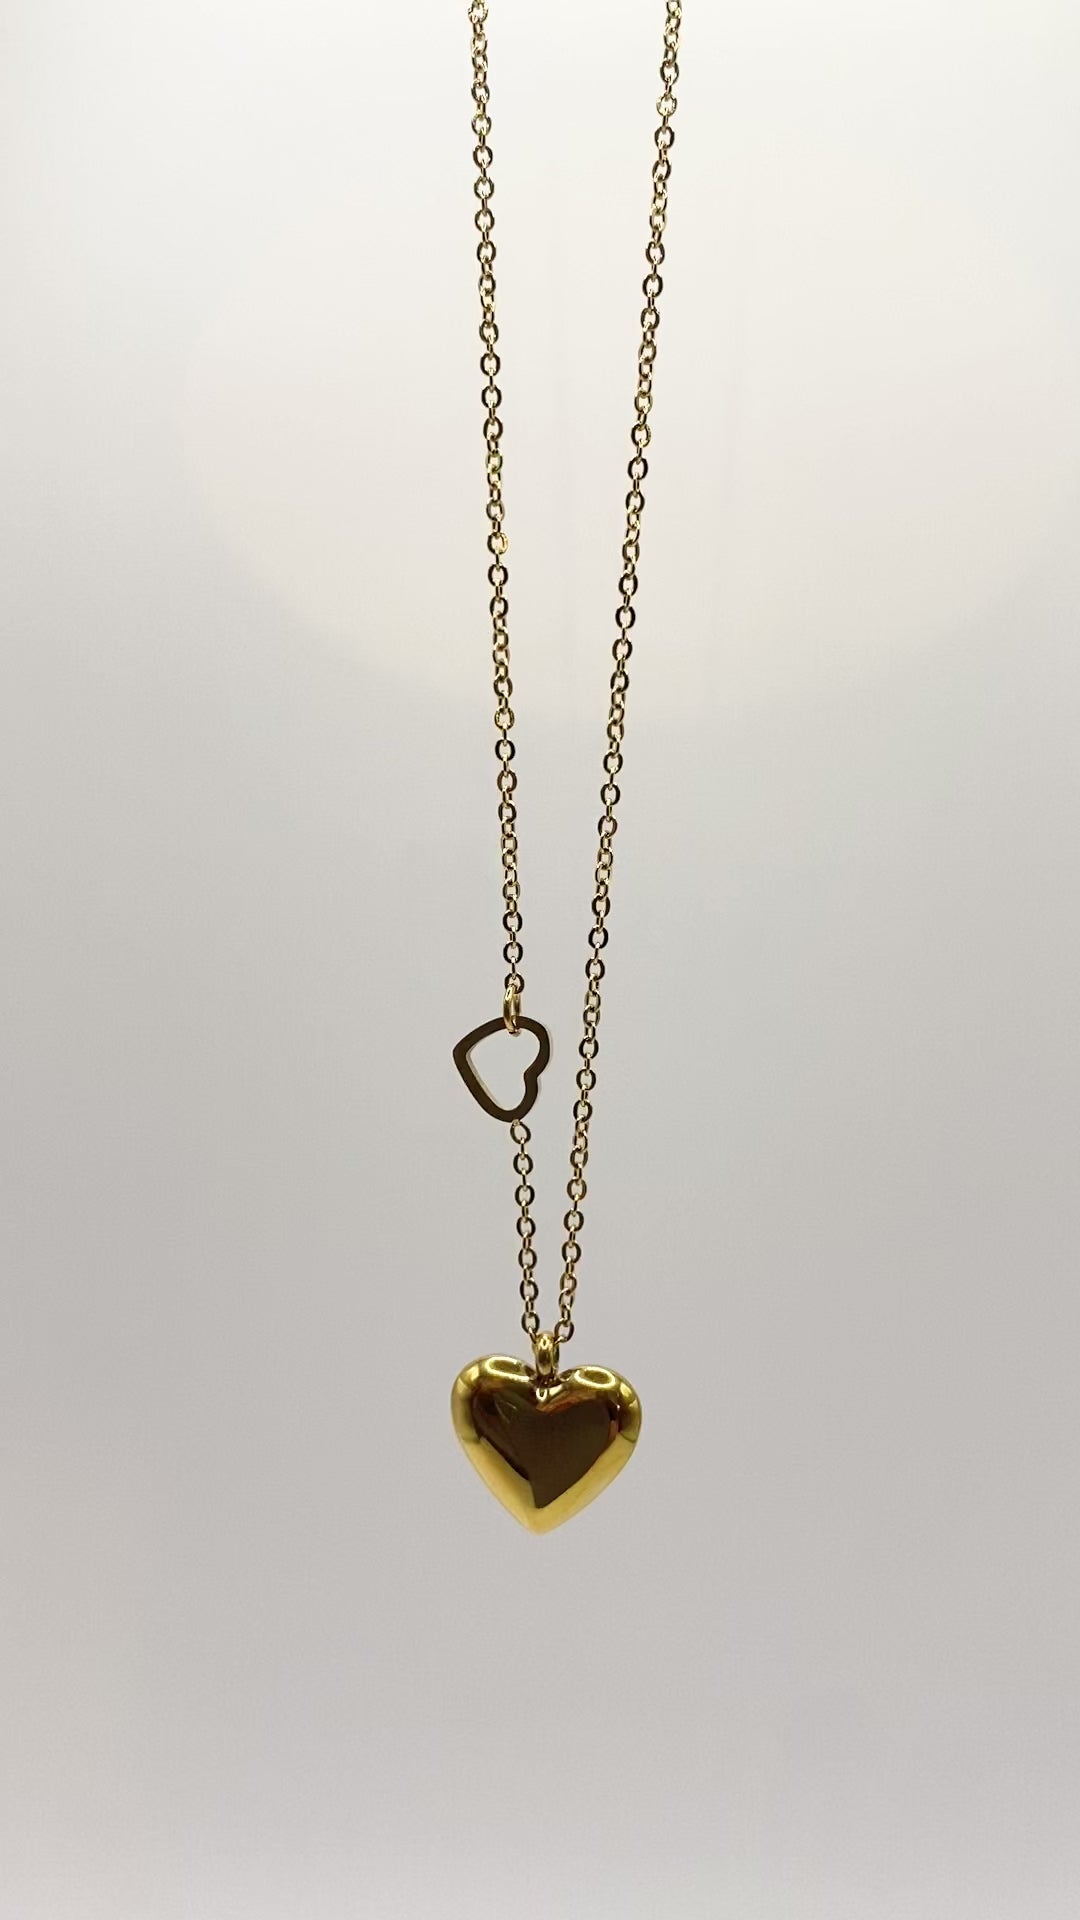 Double Heart Necklace